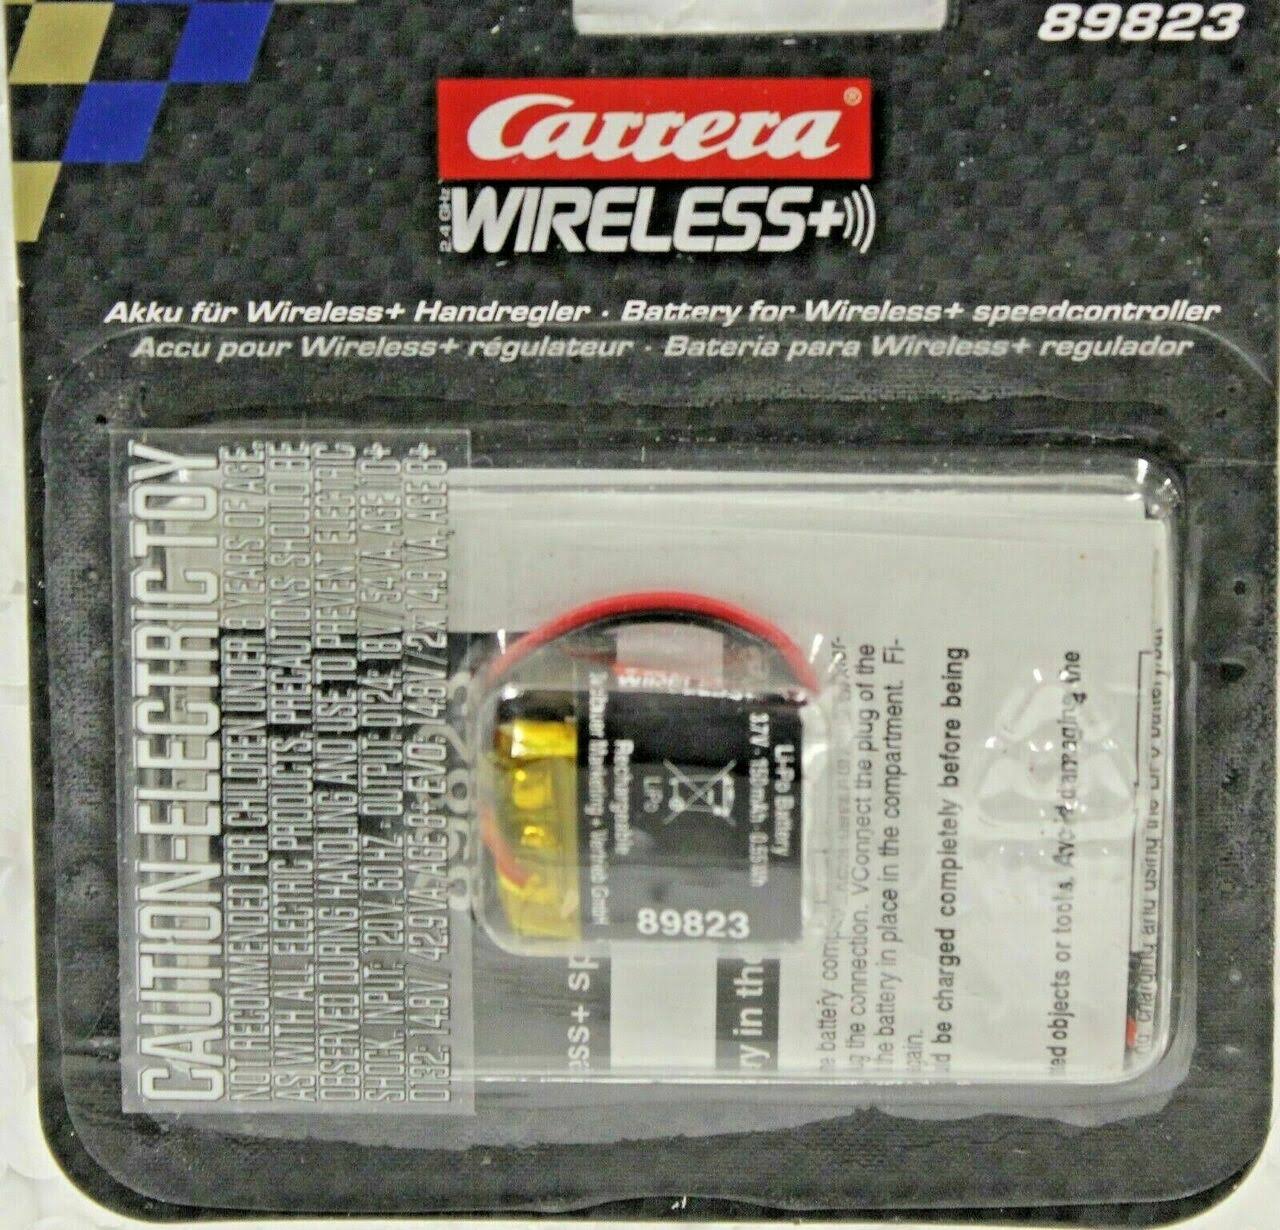 89823 Carrera Wireless Replacement Battery for Speed Controller/Wireless 1:32 Slot Car Part